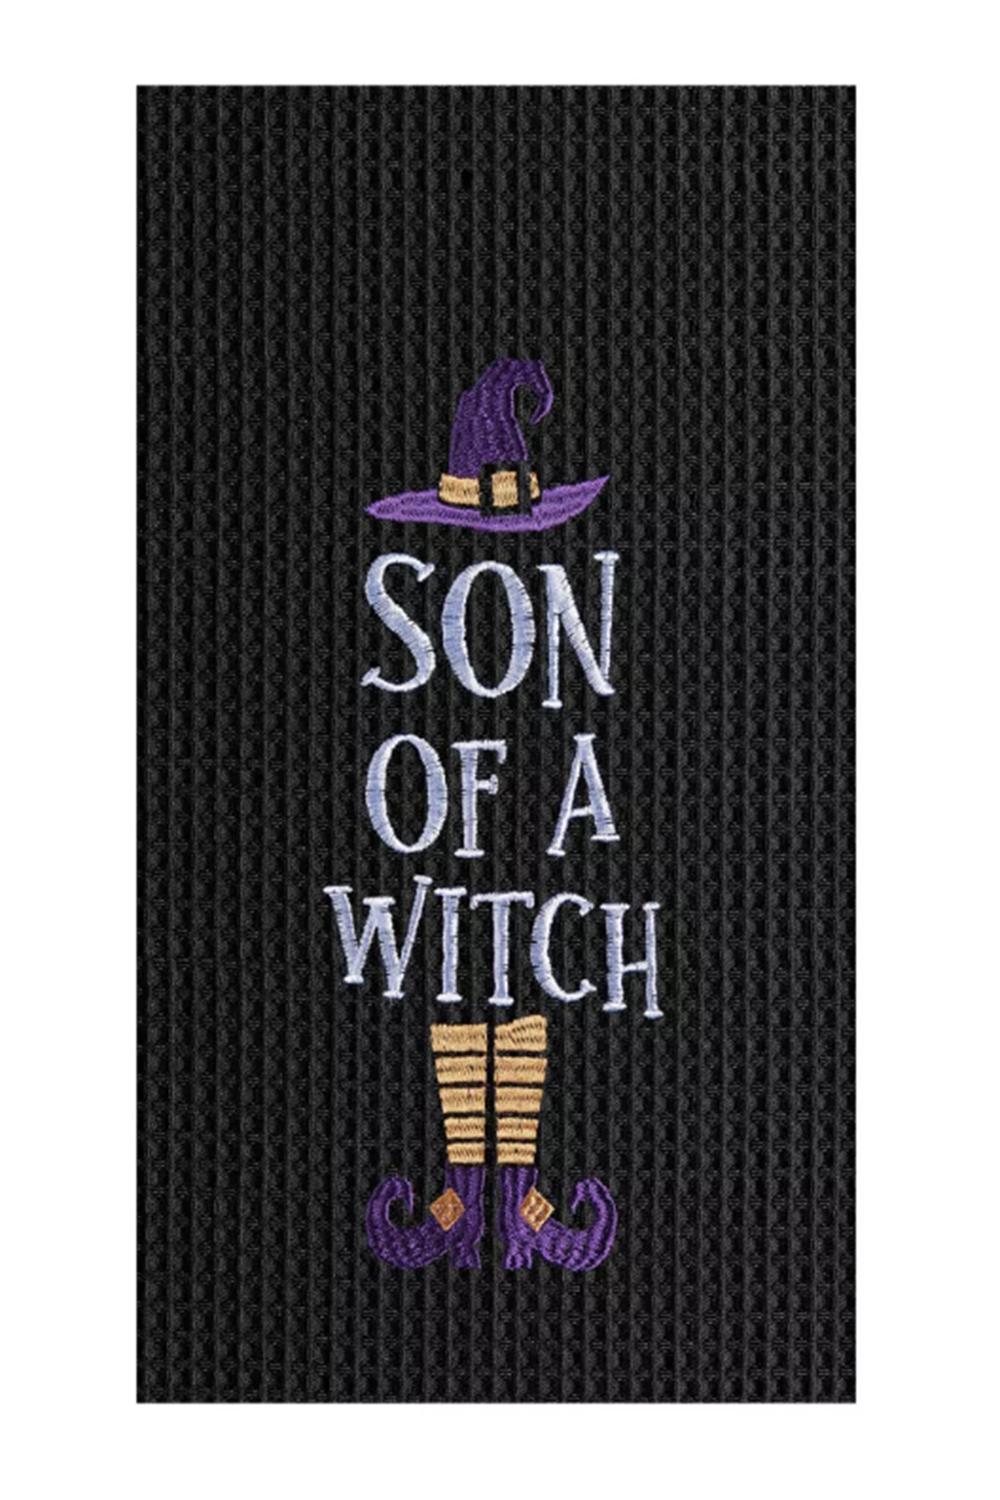 Halloween Waffle Kitchen Towel - Son of a Witch